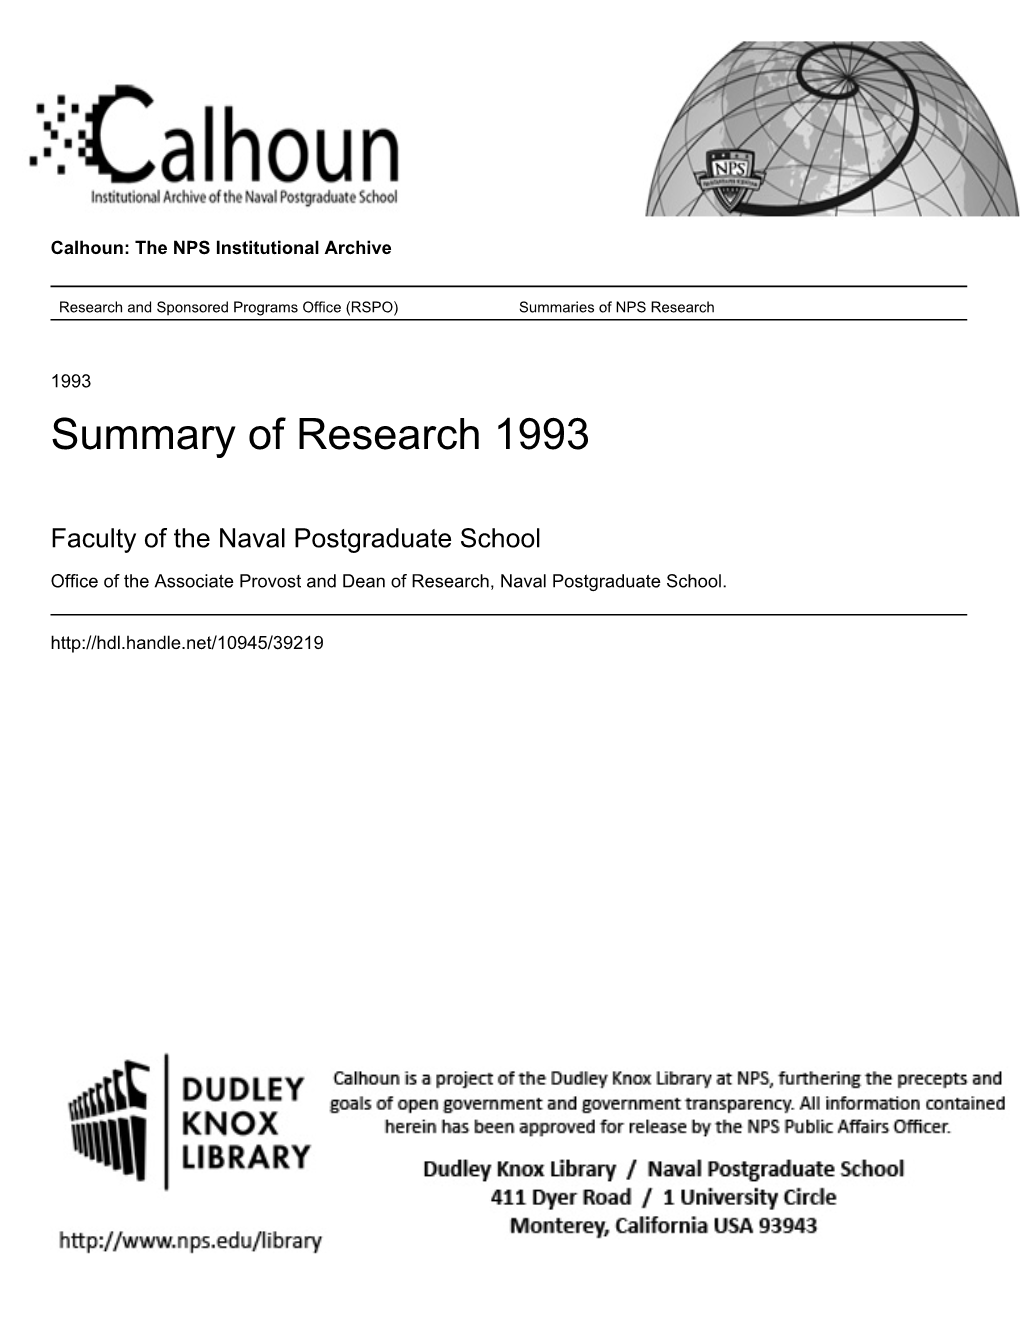 Summary of Research 1993